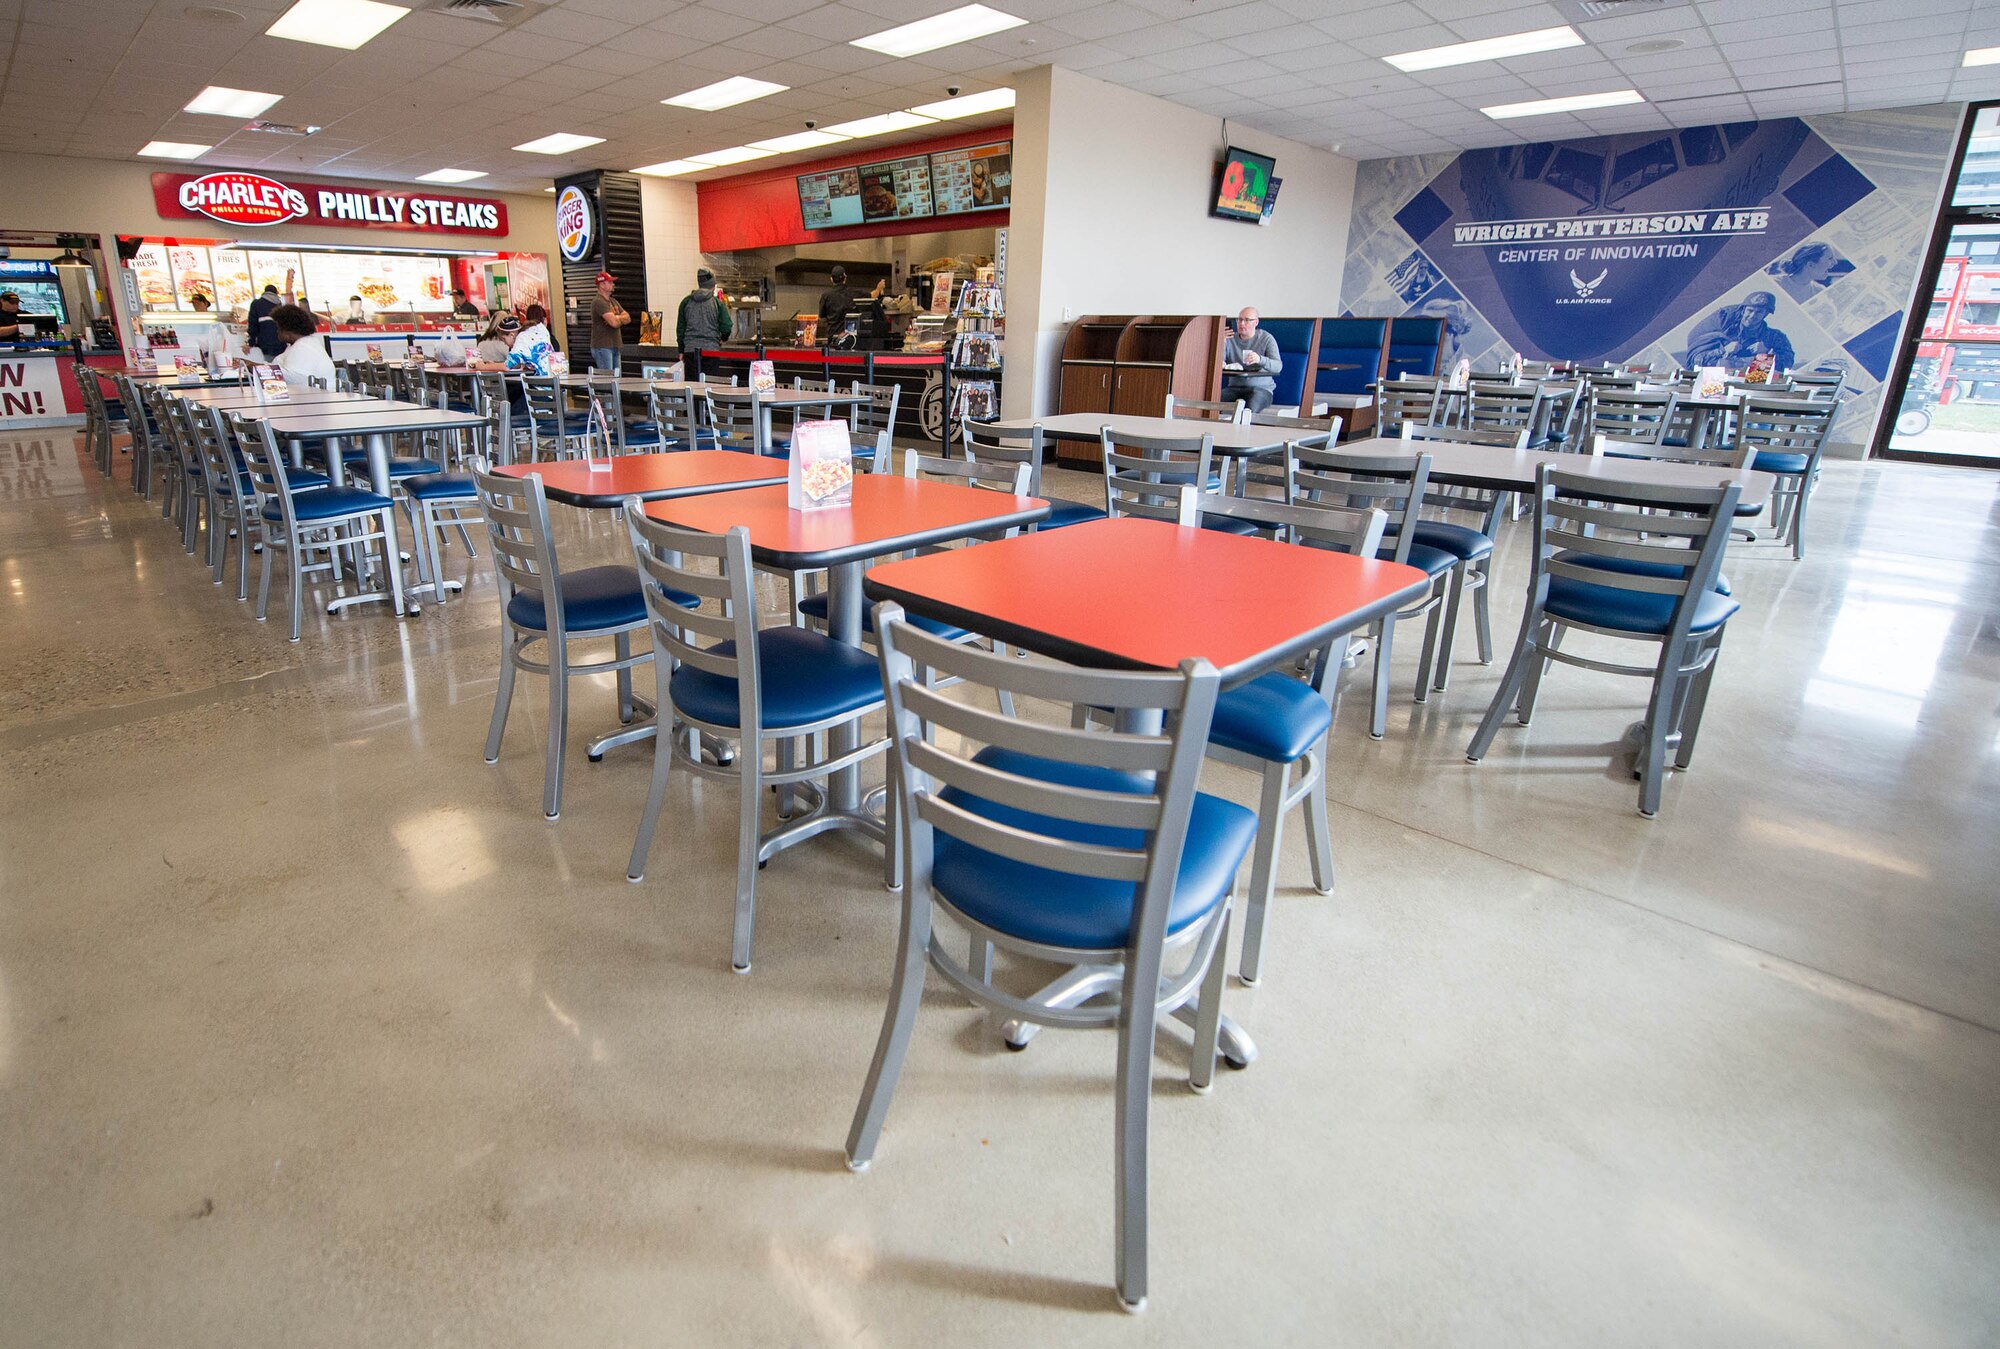 Wright-Patterson’s Exchange Food Court received new seating and polished concrete flooring, amongst other improvements, as part of the $6.4 million renovation.